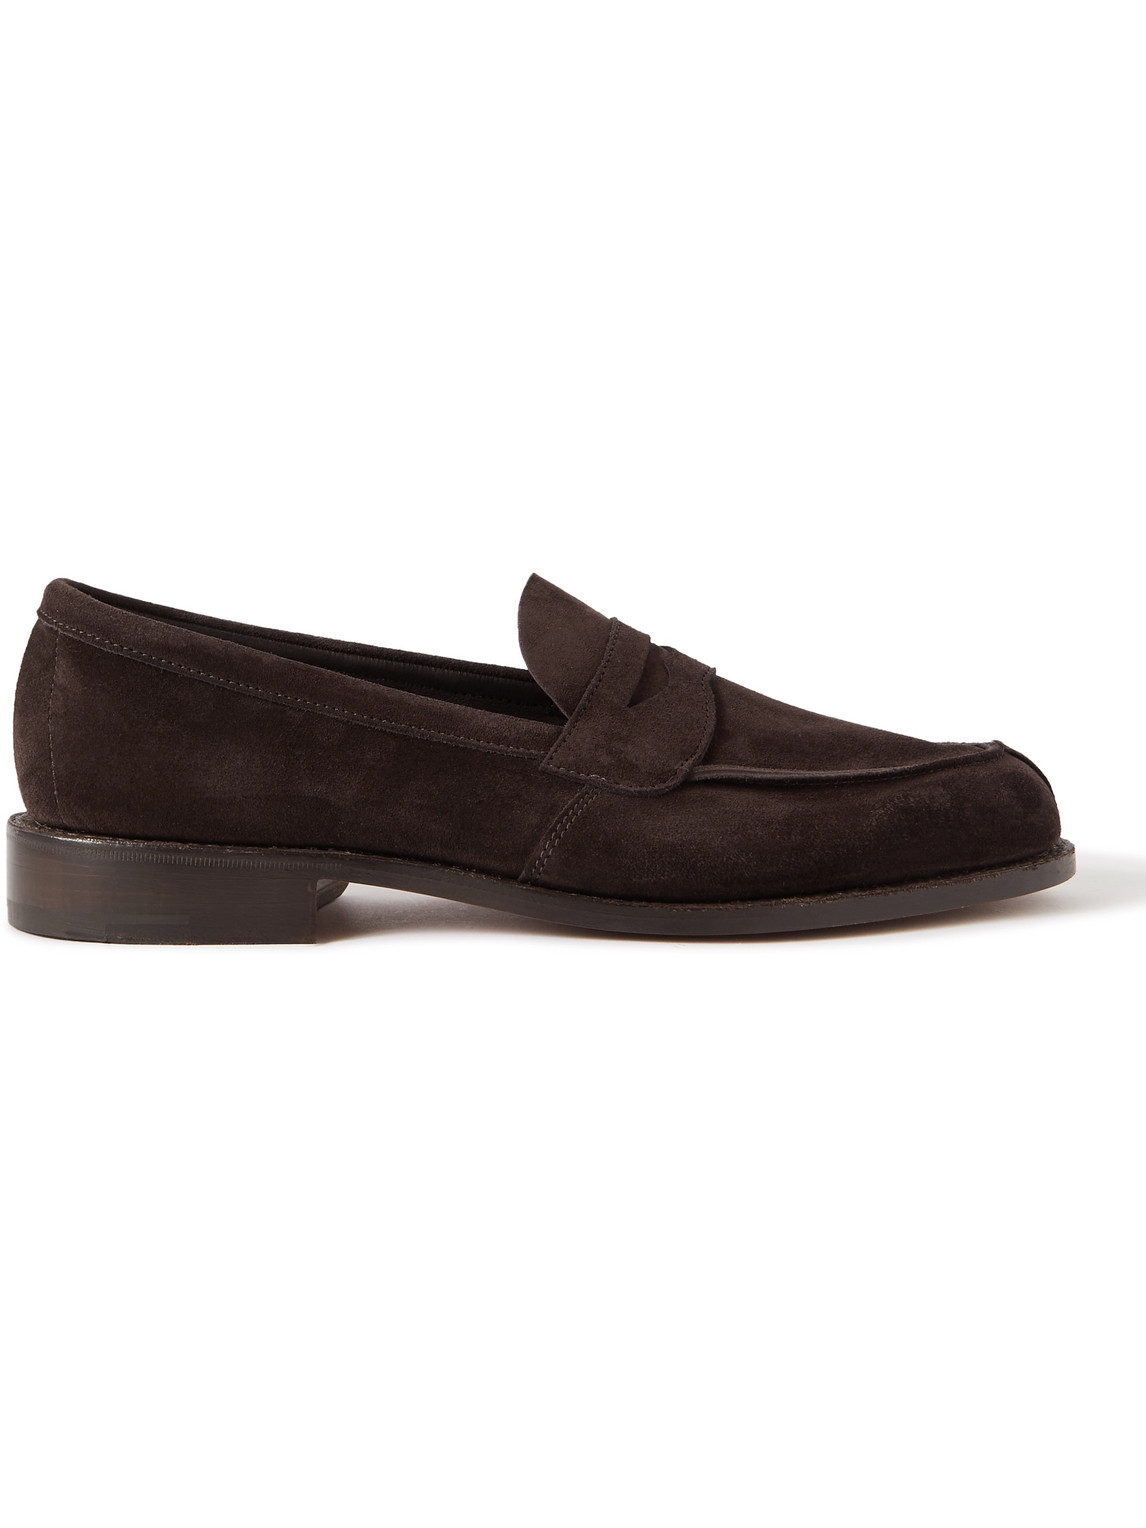 TRICKER'S MAINE SUEDE PENNY LOAFERS